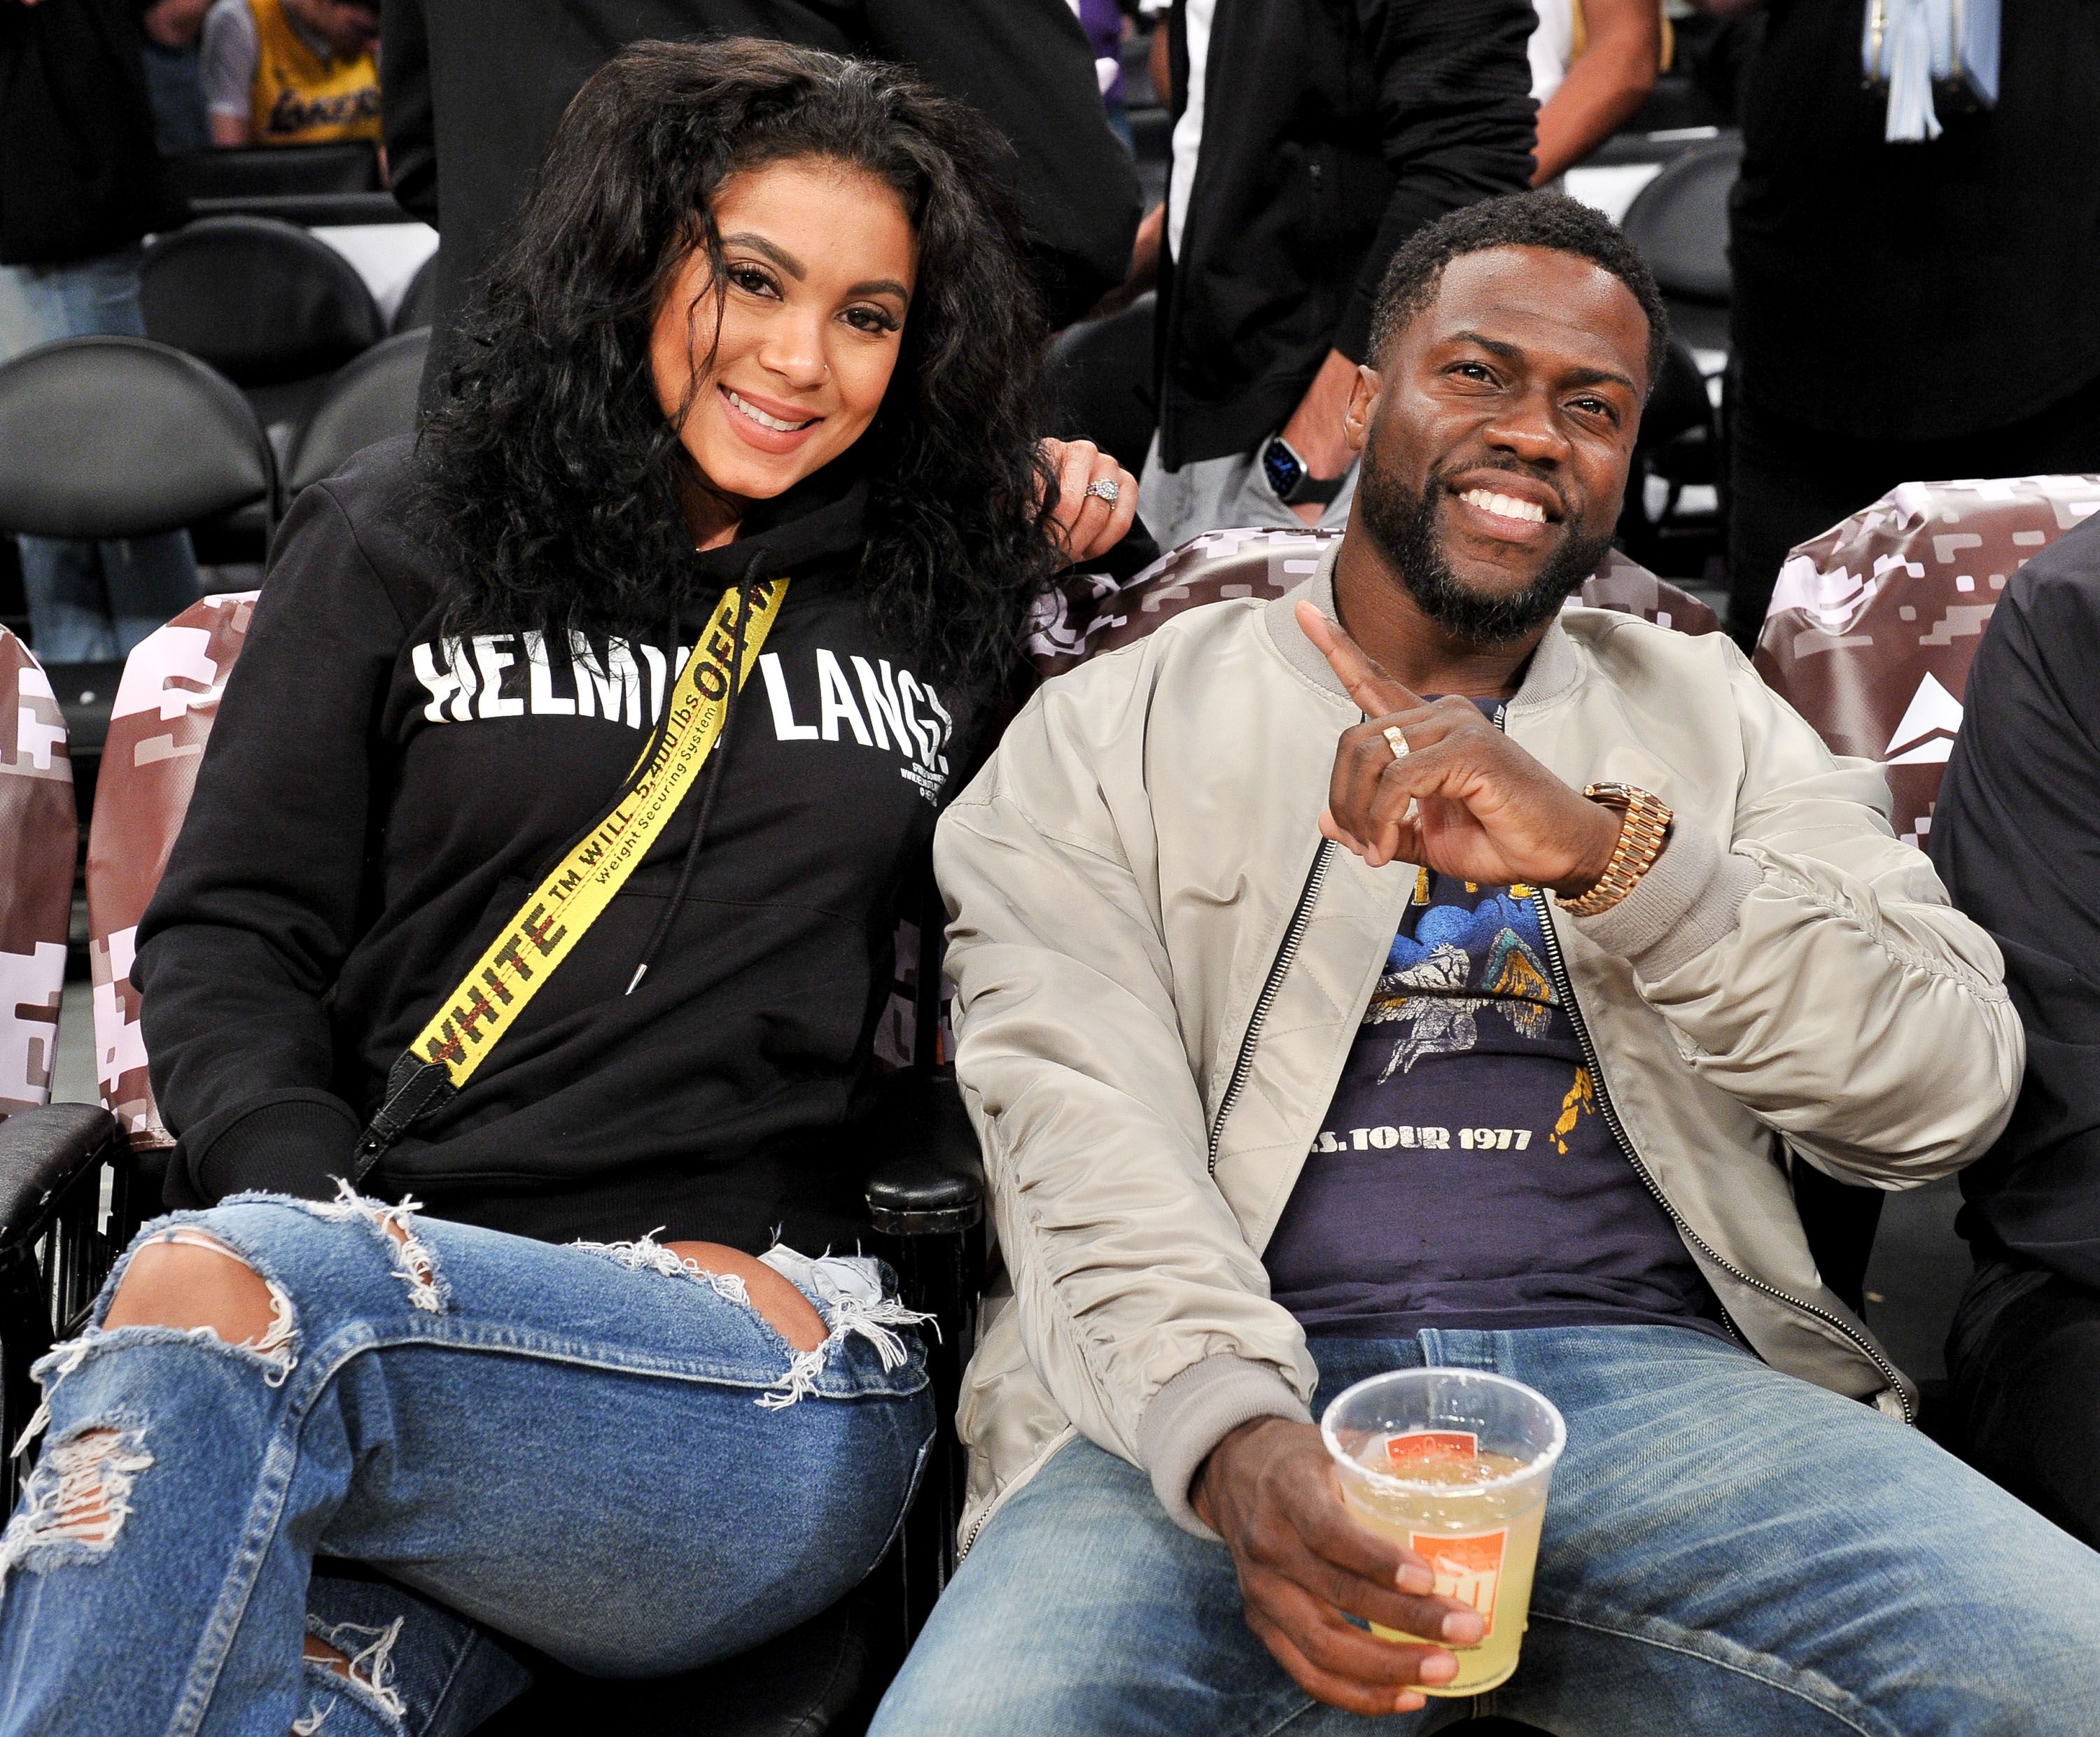 Kevin Hart and Eniko Parrish at a Los Angeles Lakers and the Atlanta Hawks basketball game on November 17, 2019, in Los Angeles, California | Photo: Allen Berezovsky/Getty Images